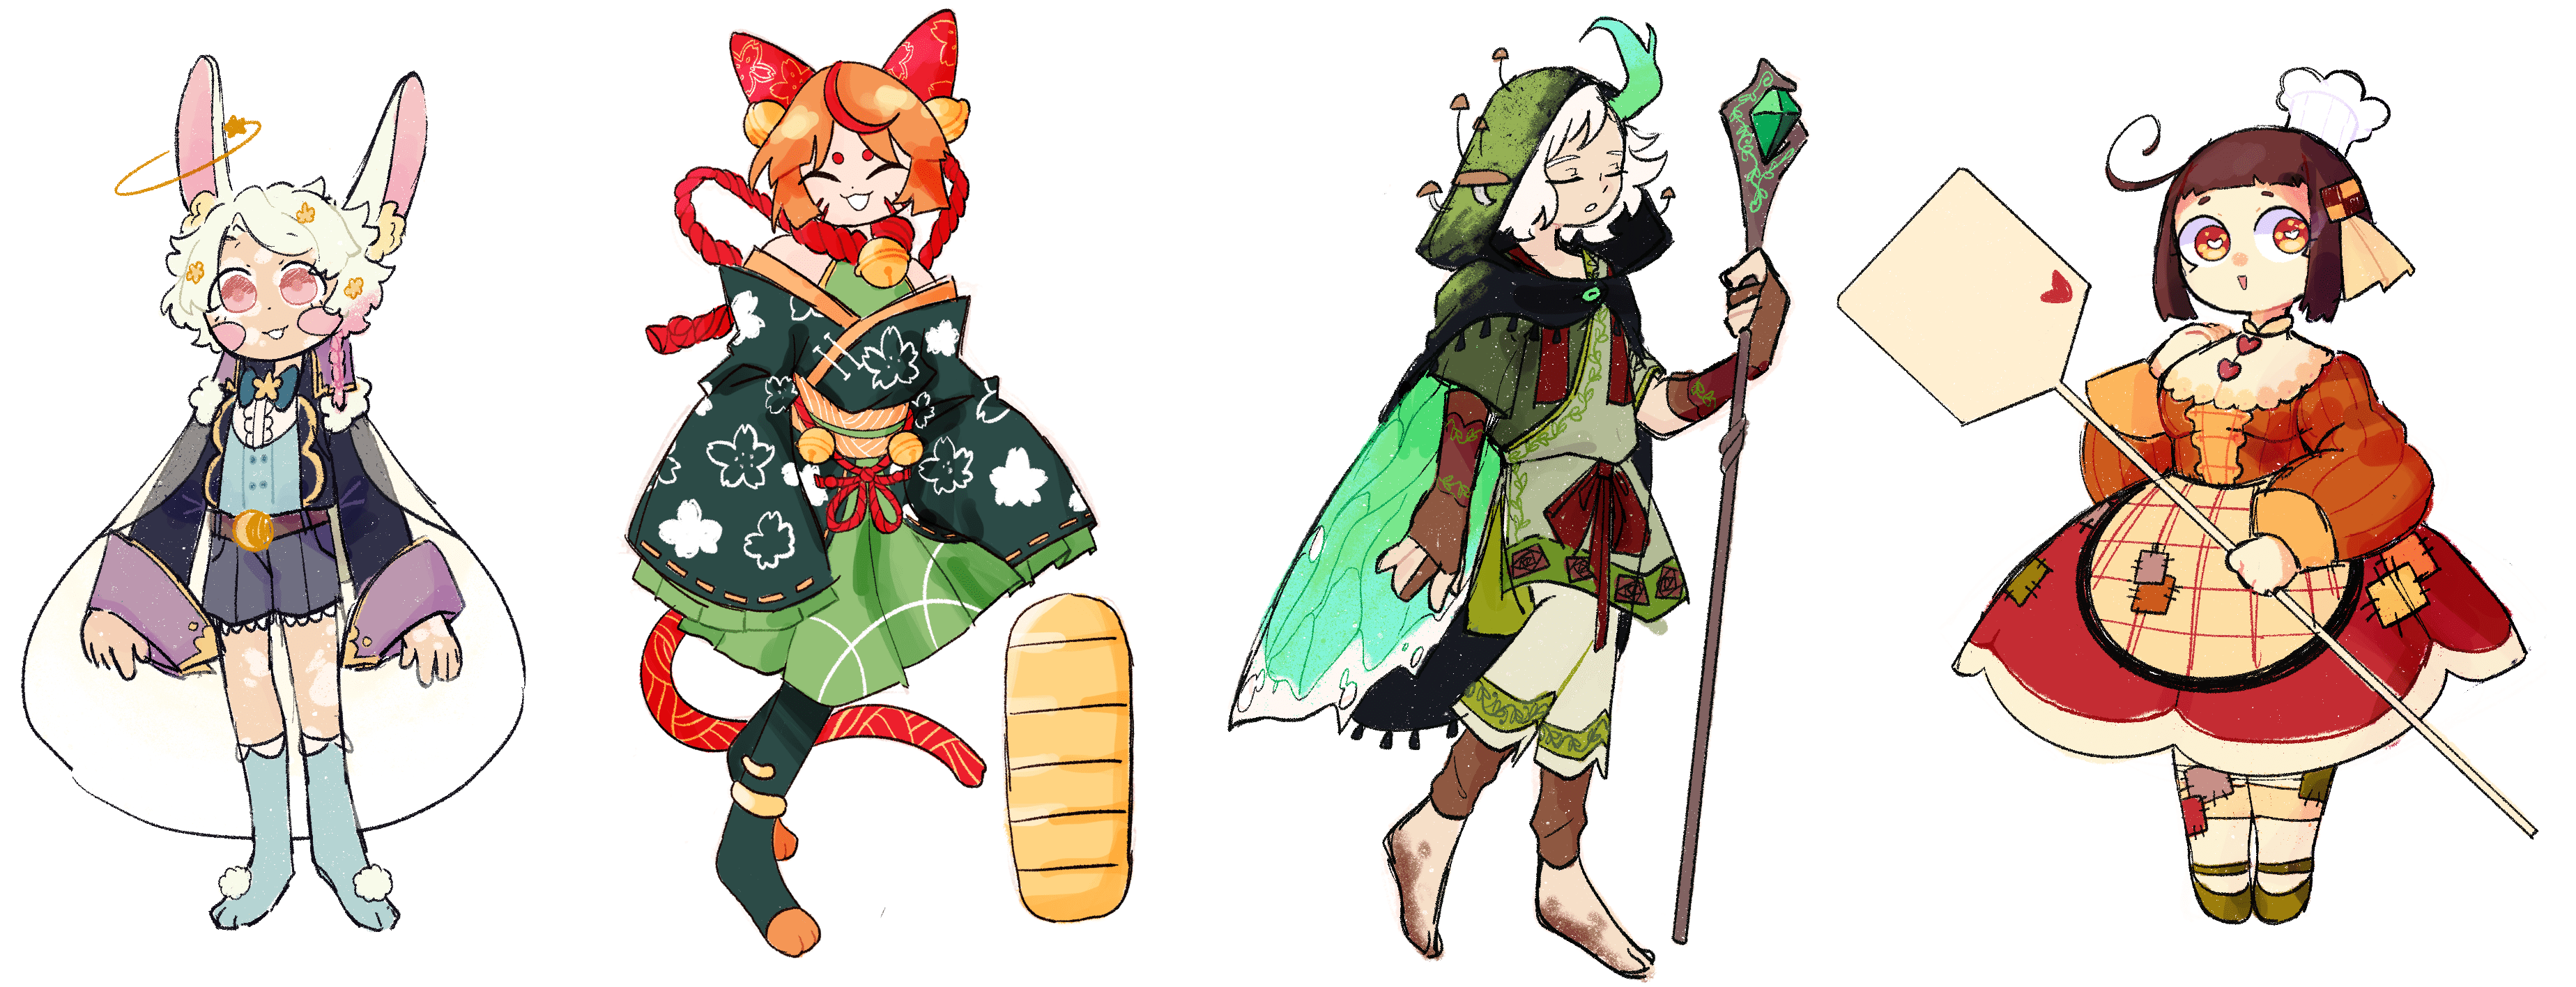 Character designs of various themes done in 2020, from left to right: Moon Rabbit, Lucky Cat, Druid, and Baker.